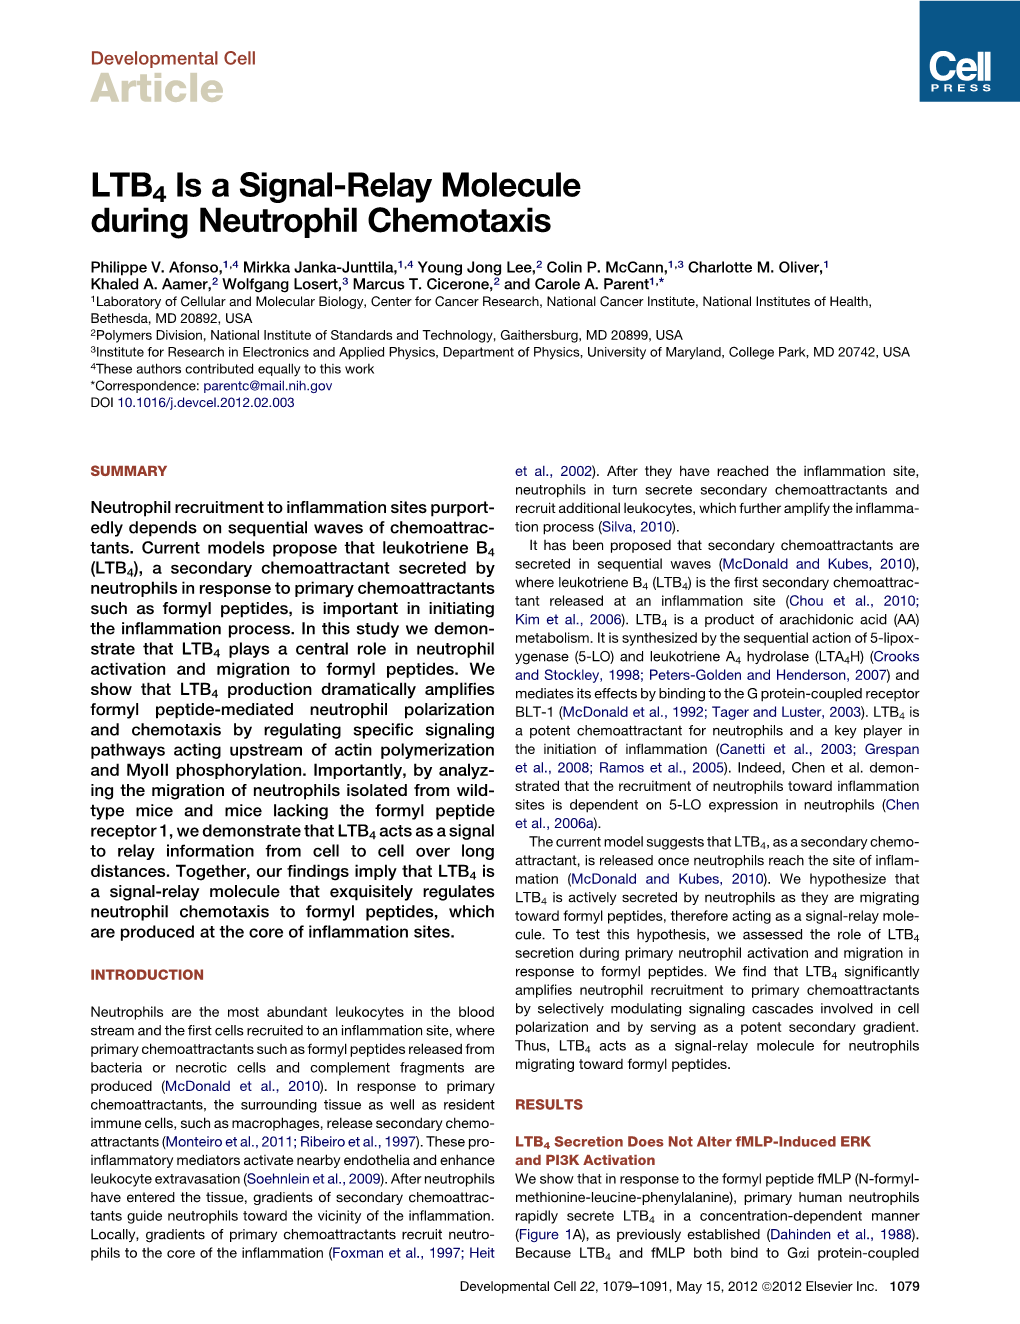 LTB4 Is a Signal-Relay Molecule During Neutrophil Chemotaxis